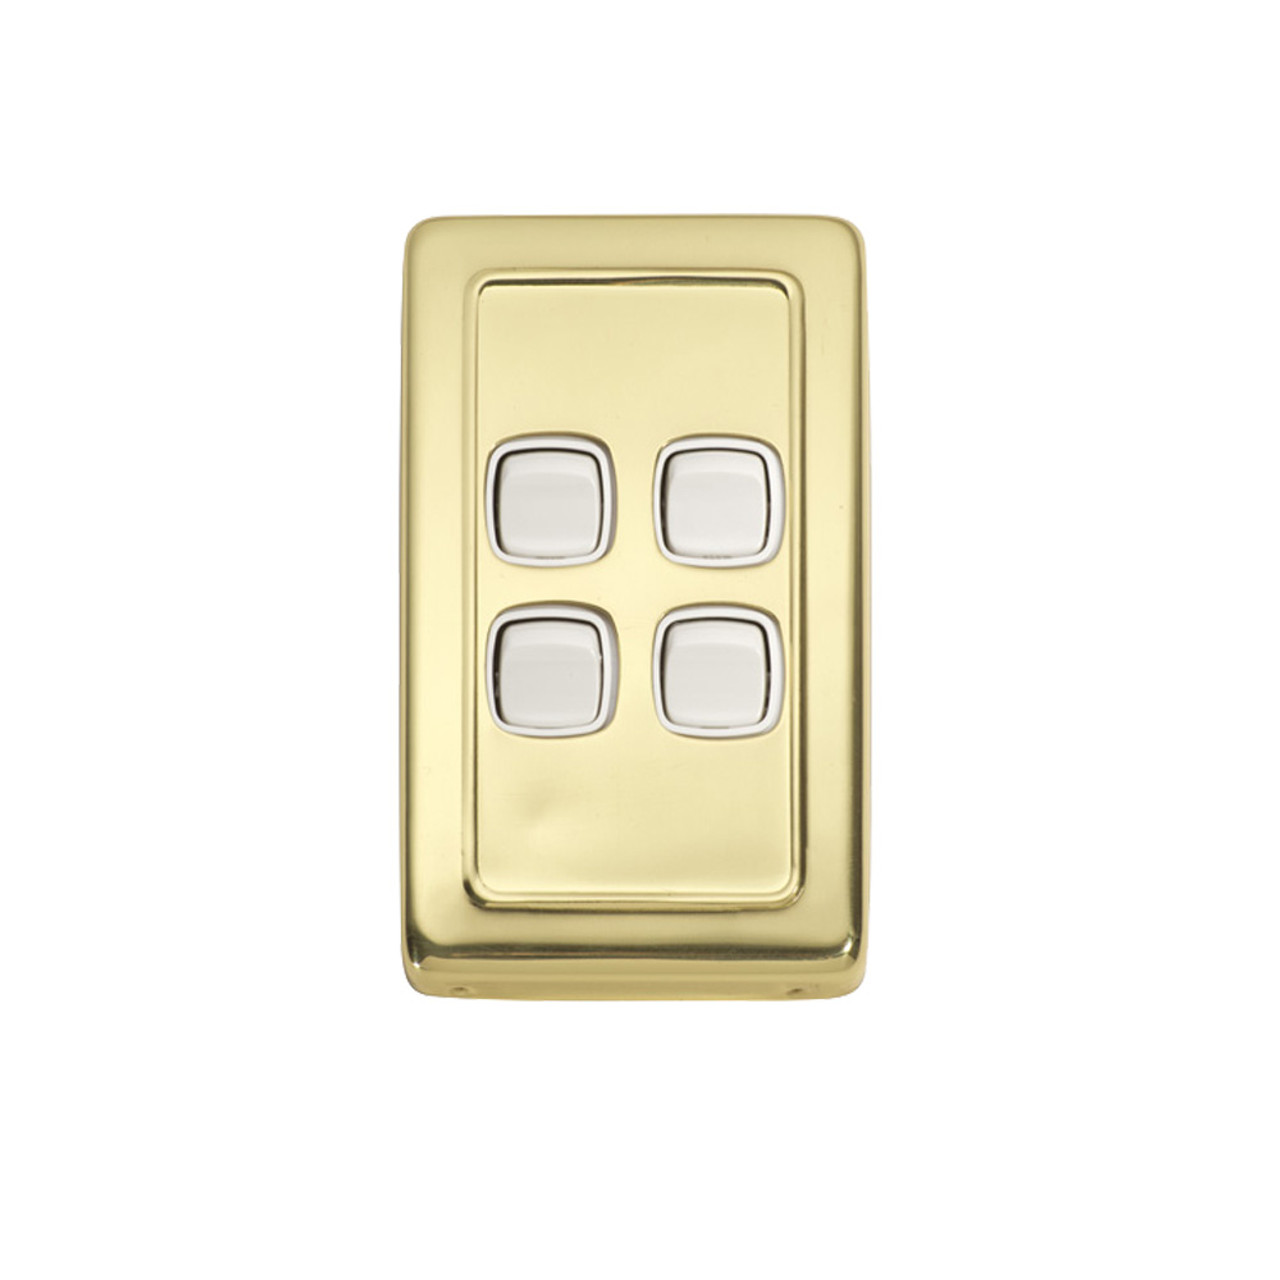 4 Gang Flat Plate Heritage Light Switch - Polished Brass Plate with White Rocker